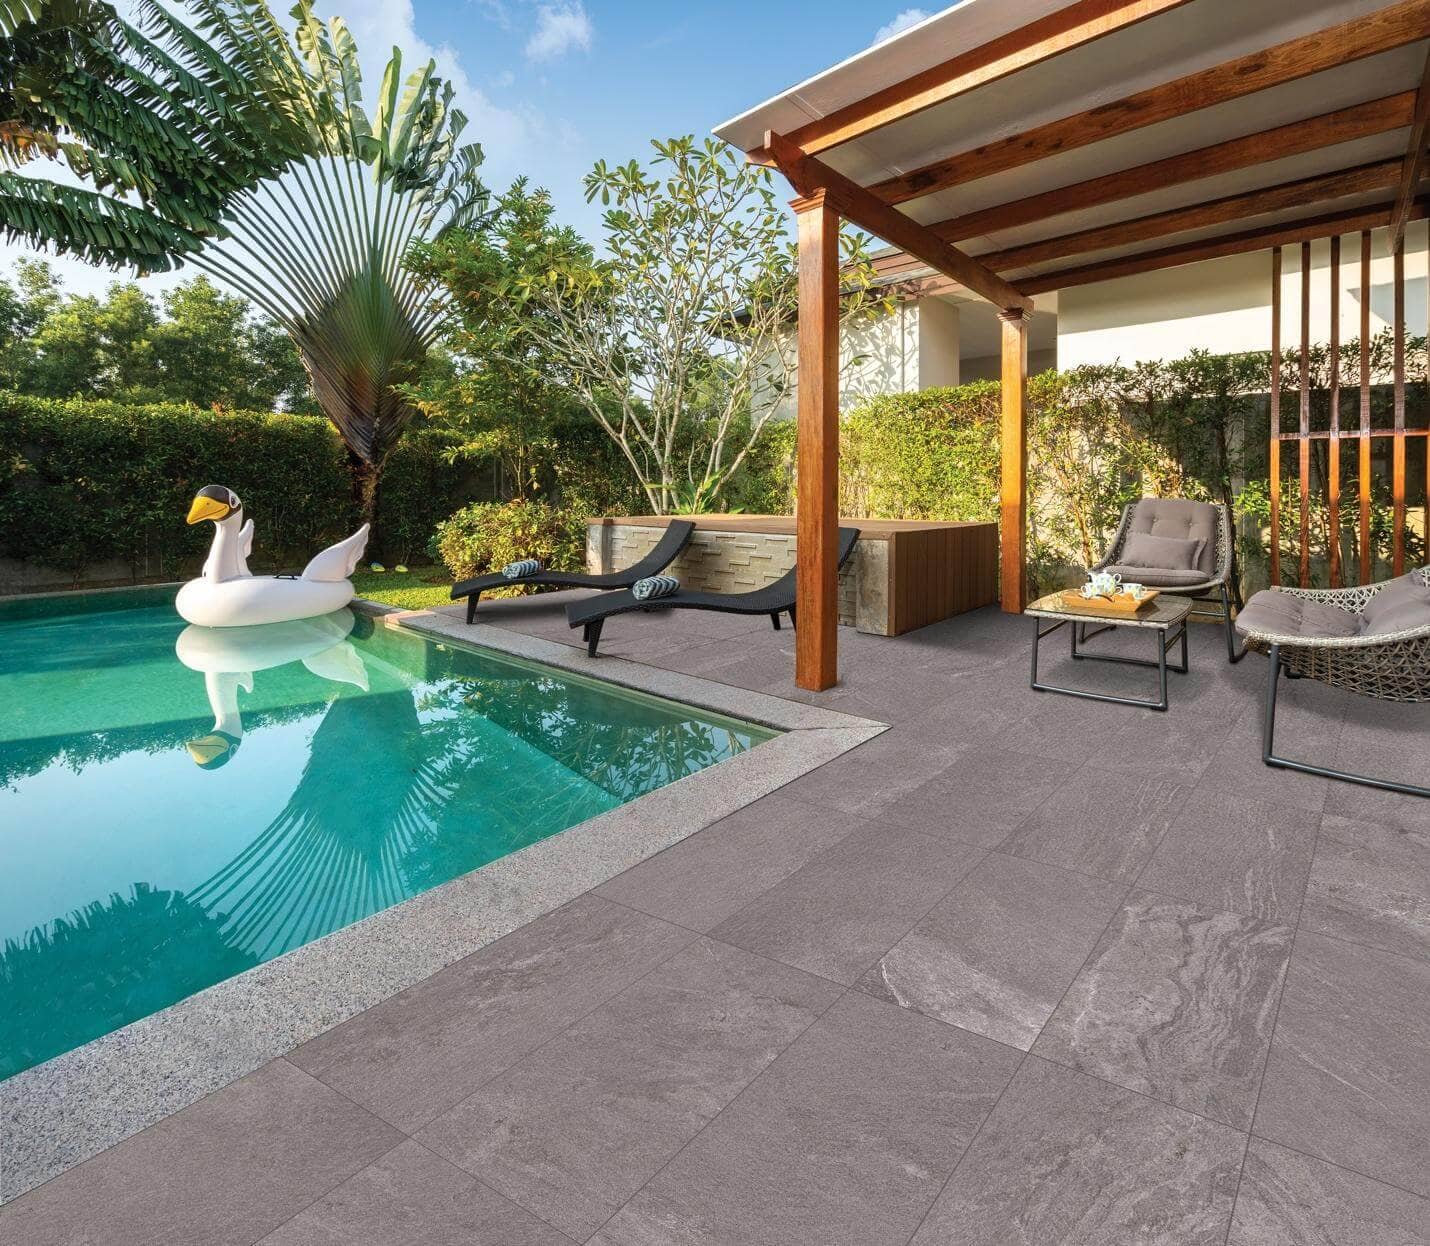 pool area with seating area and gray ceramic tile flooring for a resort-look